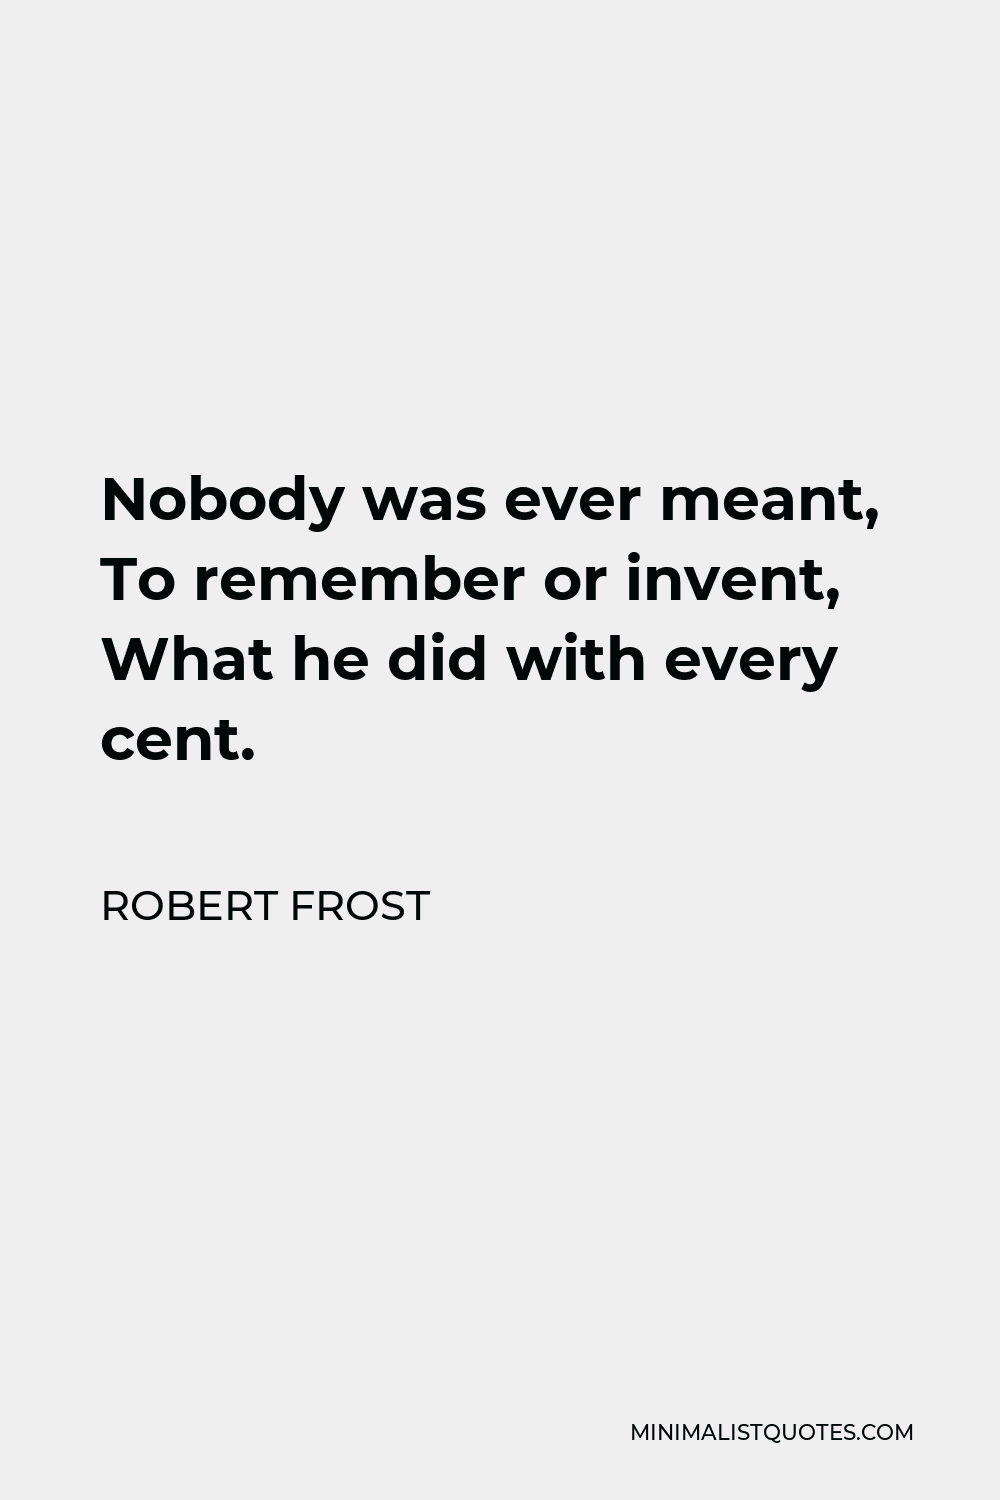 Robert Frost Quote - Nobody was ever meant, To remember or invent, What he did with every cent.